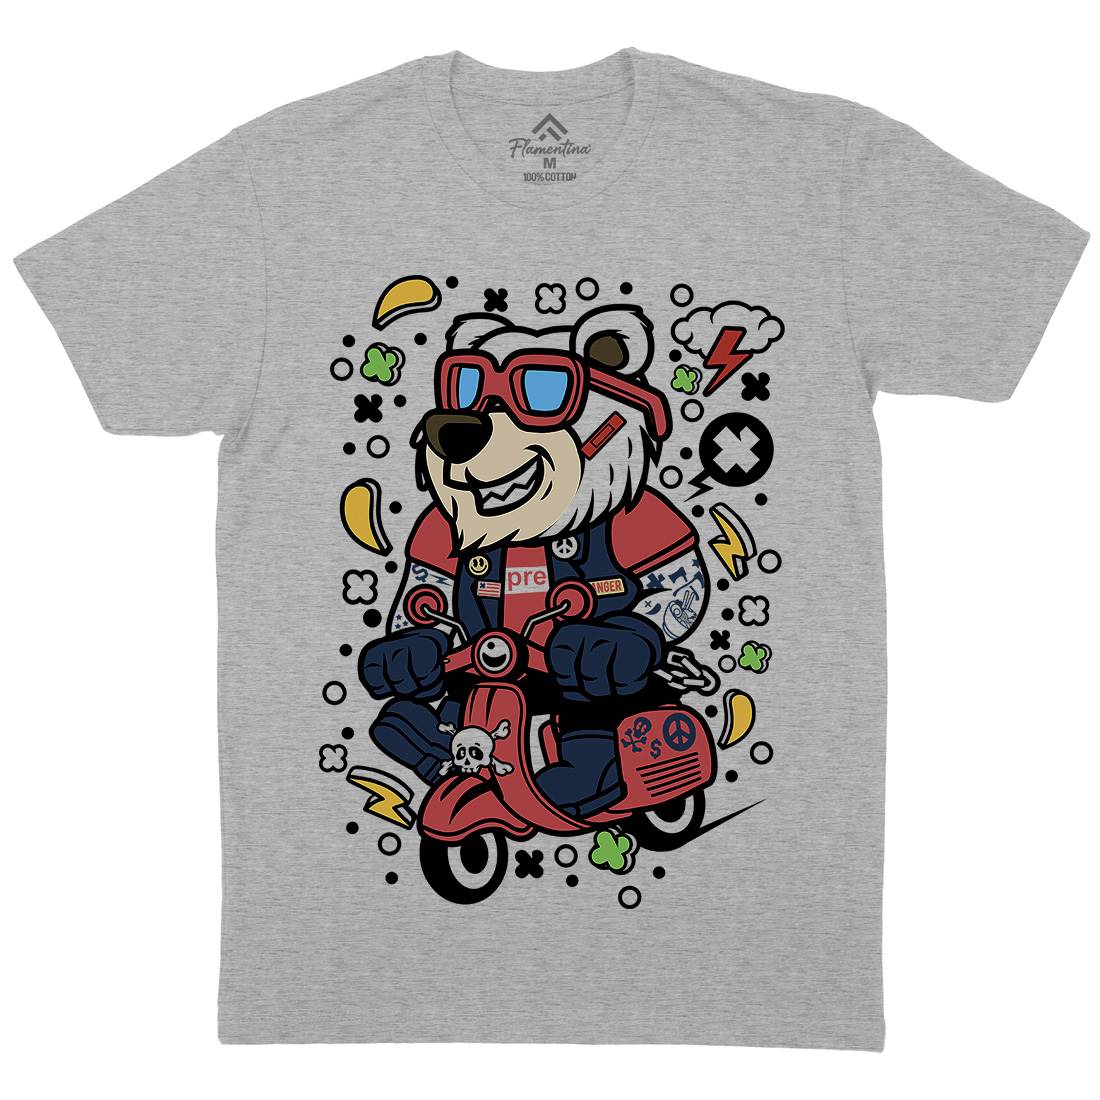 Bear Scooter Mens Crew Neck T-Shirt Motorcycles C491